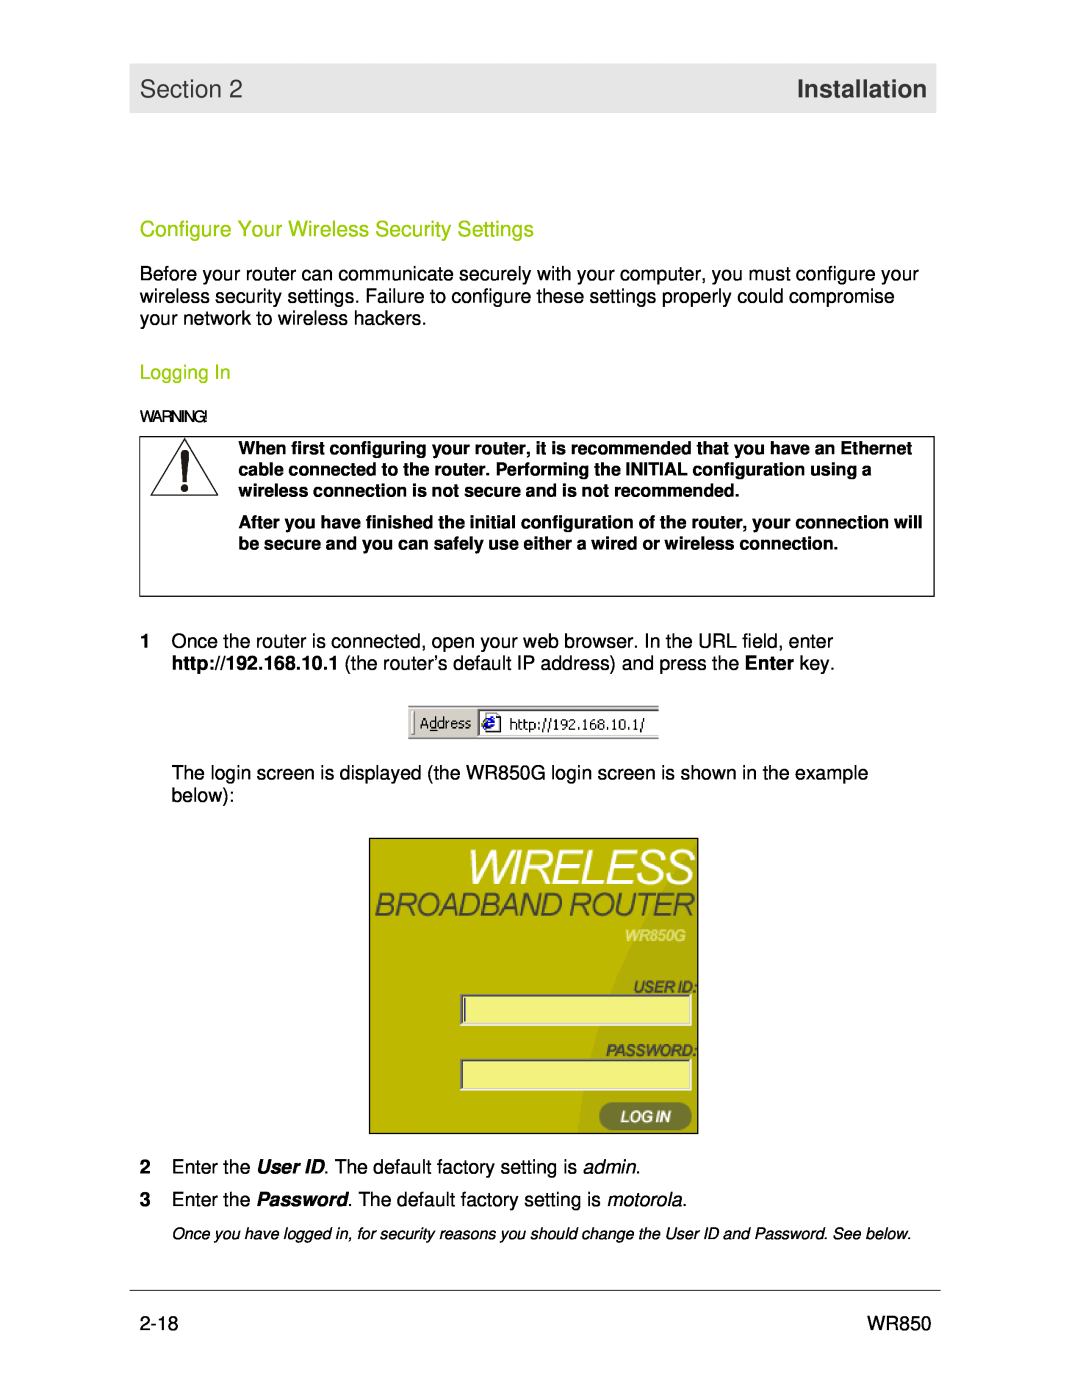 Motorola WR850 manual Configure Your Wireless Security Settings, Logging In, Section, Installation 